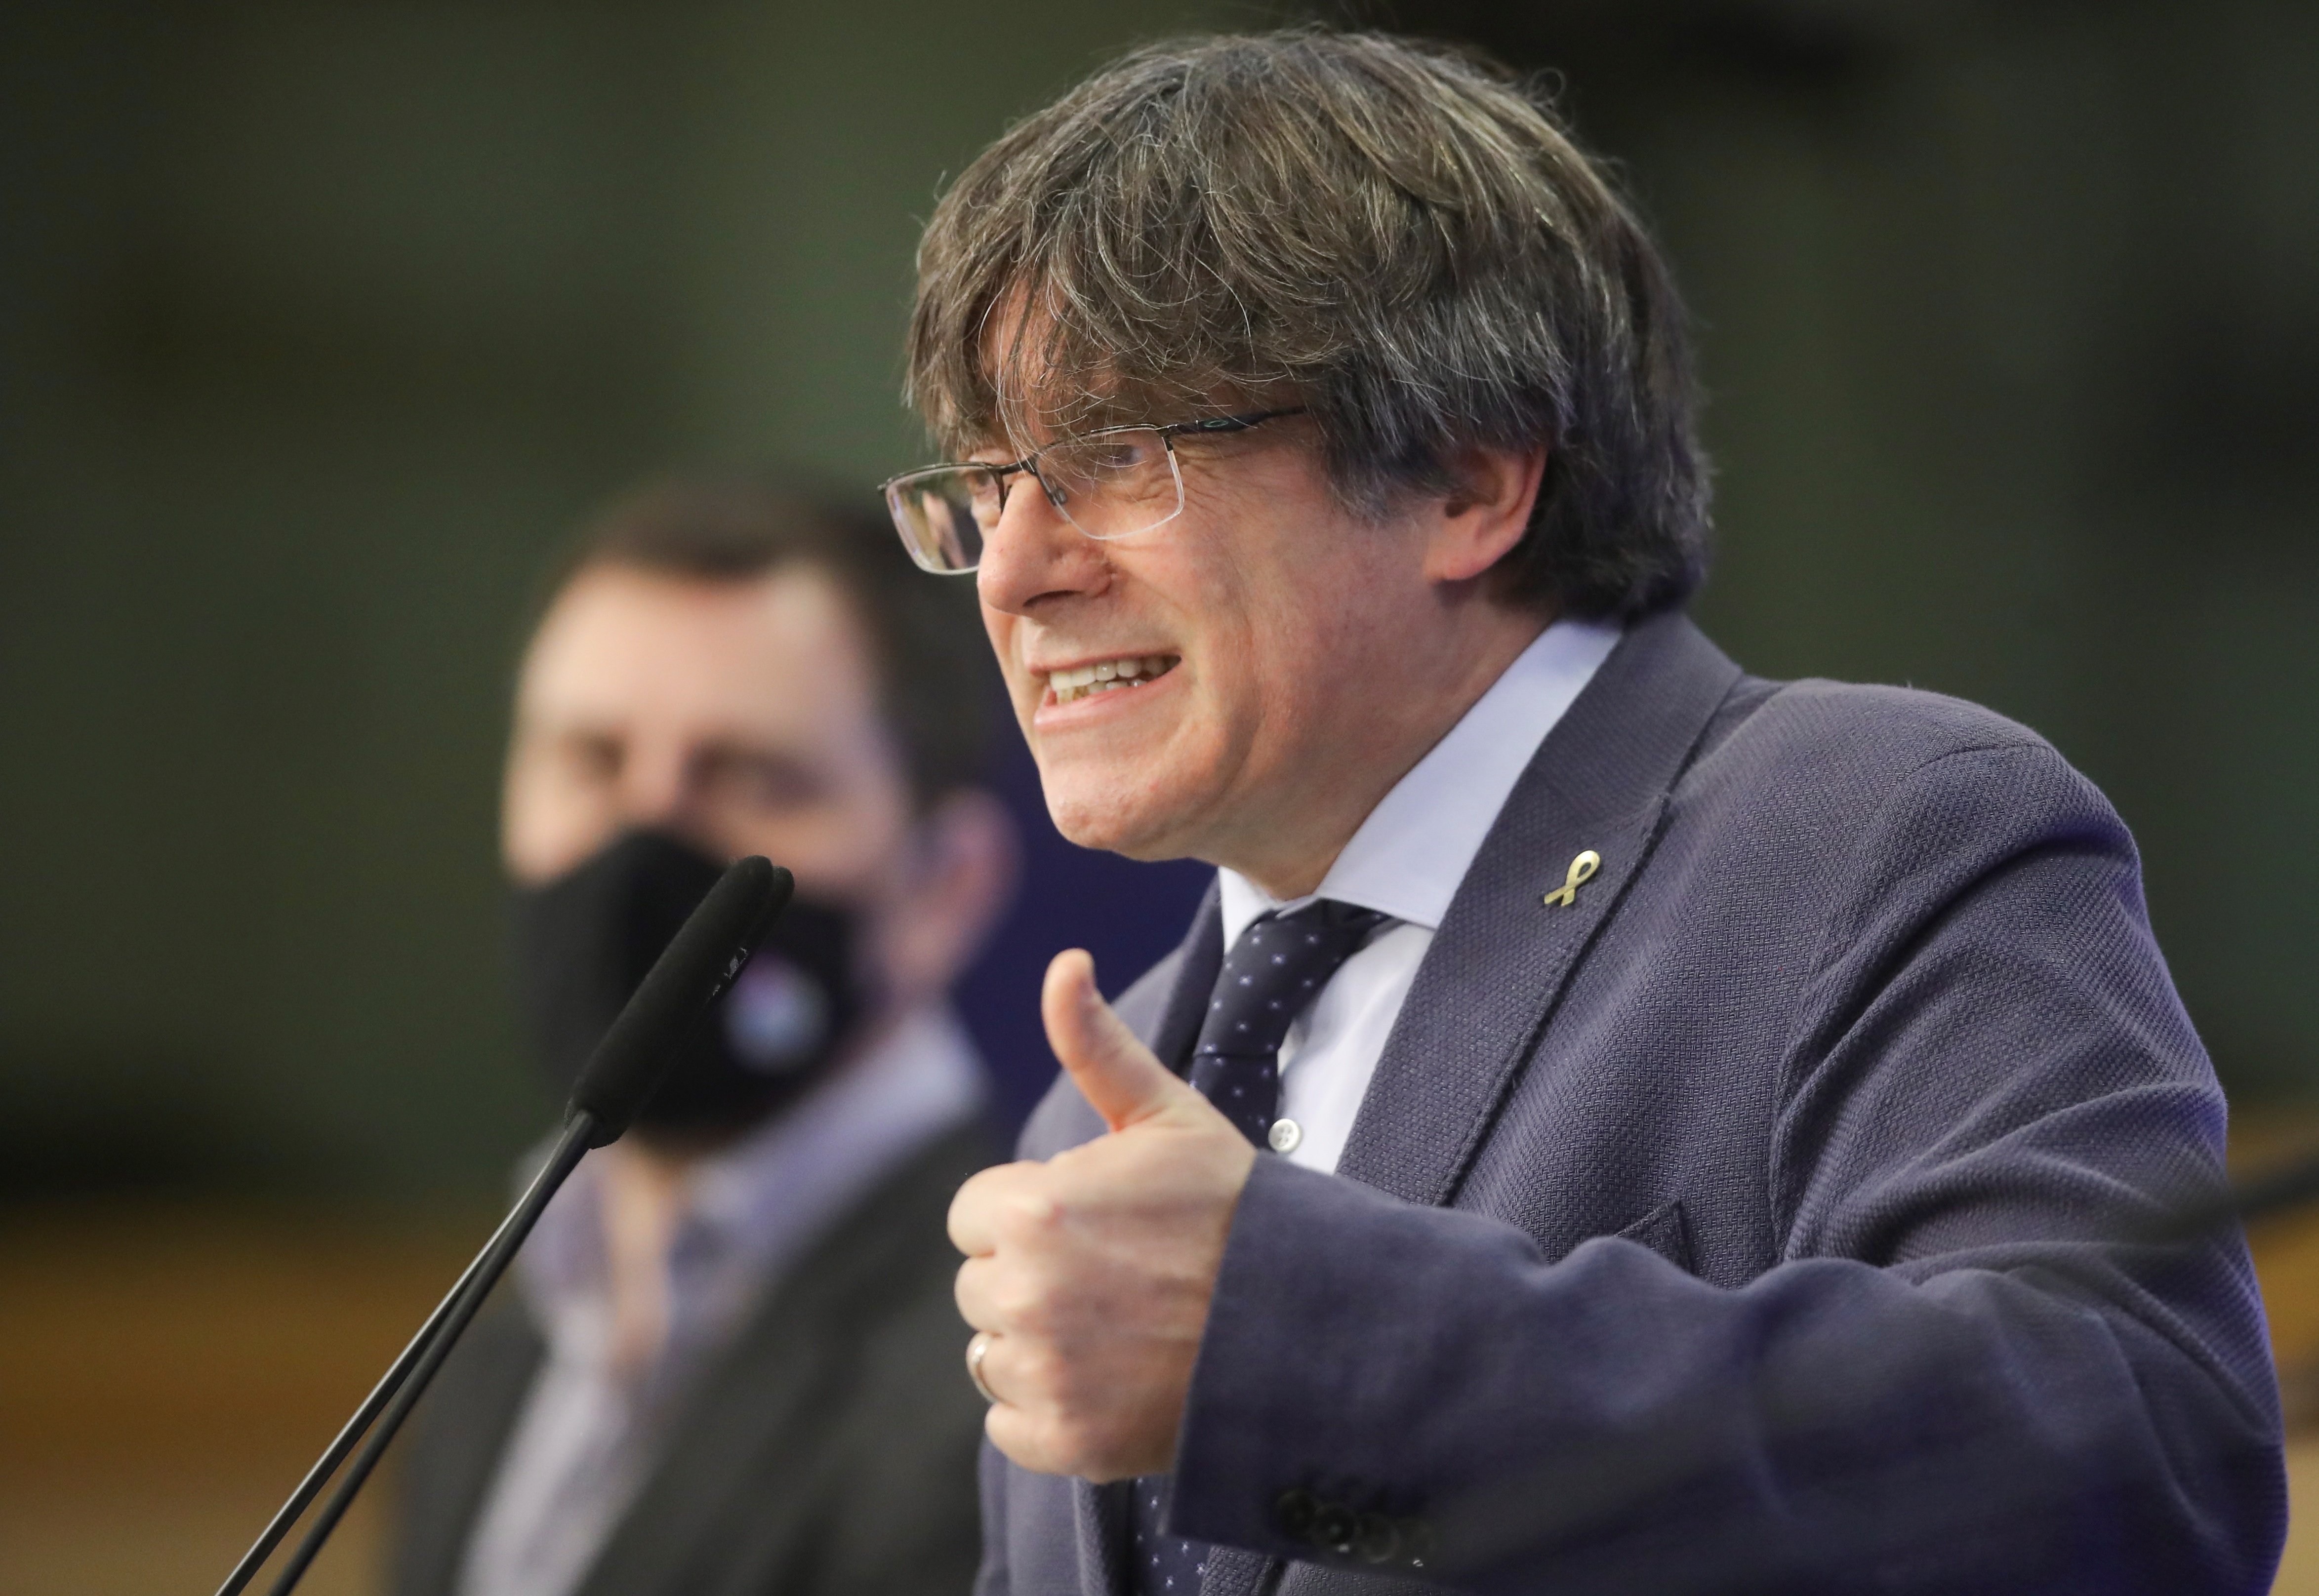 Puigdemont charges against politicians who predict his imprisonment: "they've salivated over it for years"